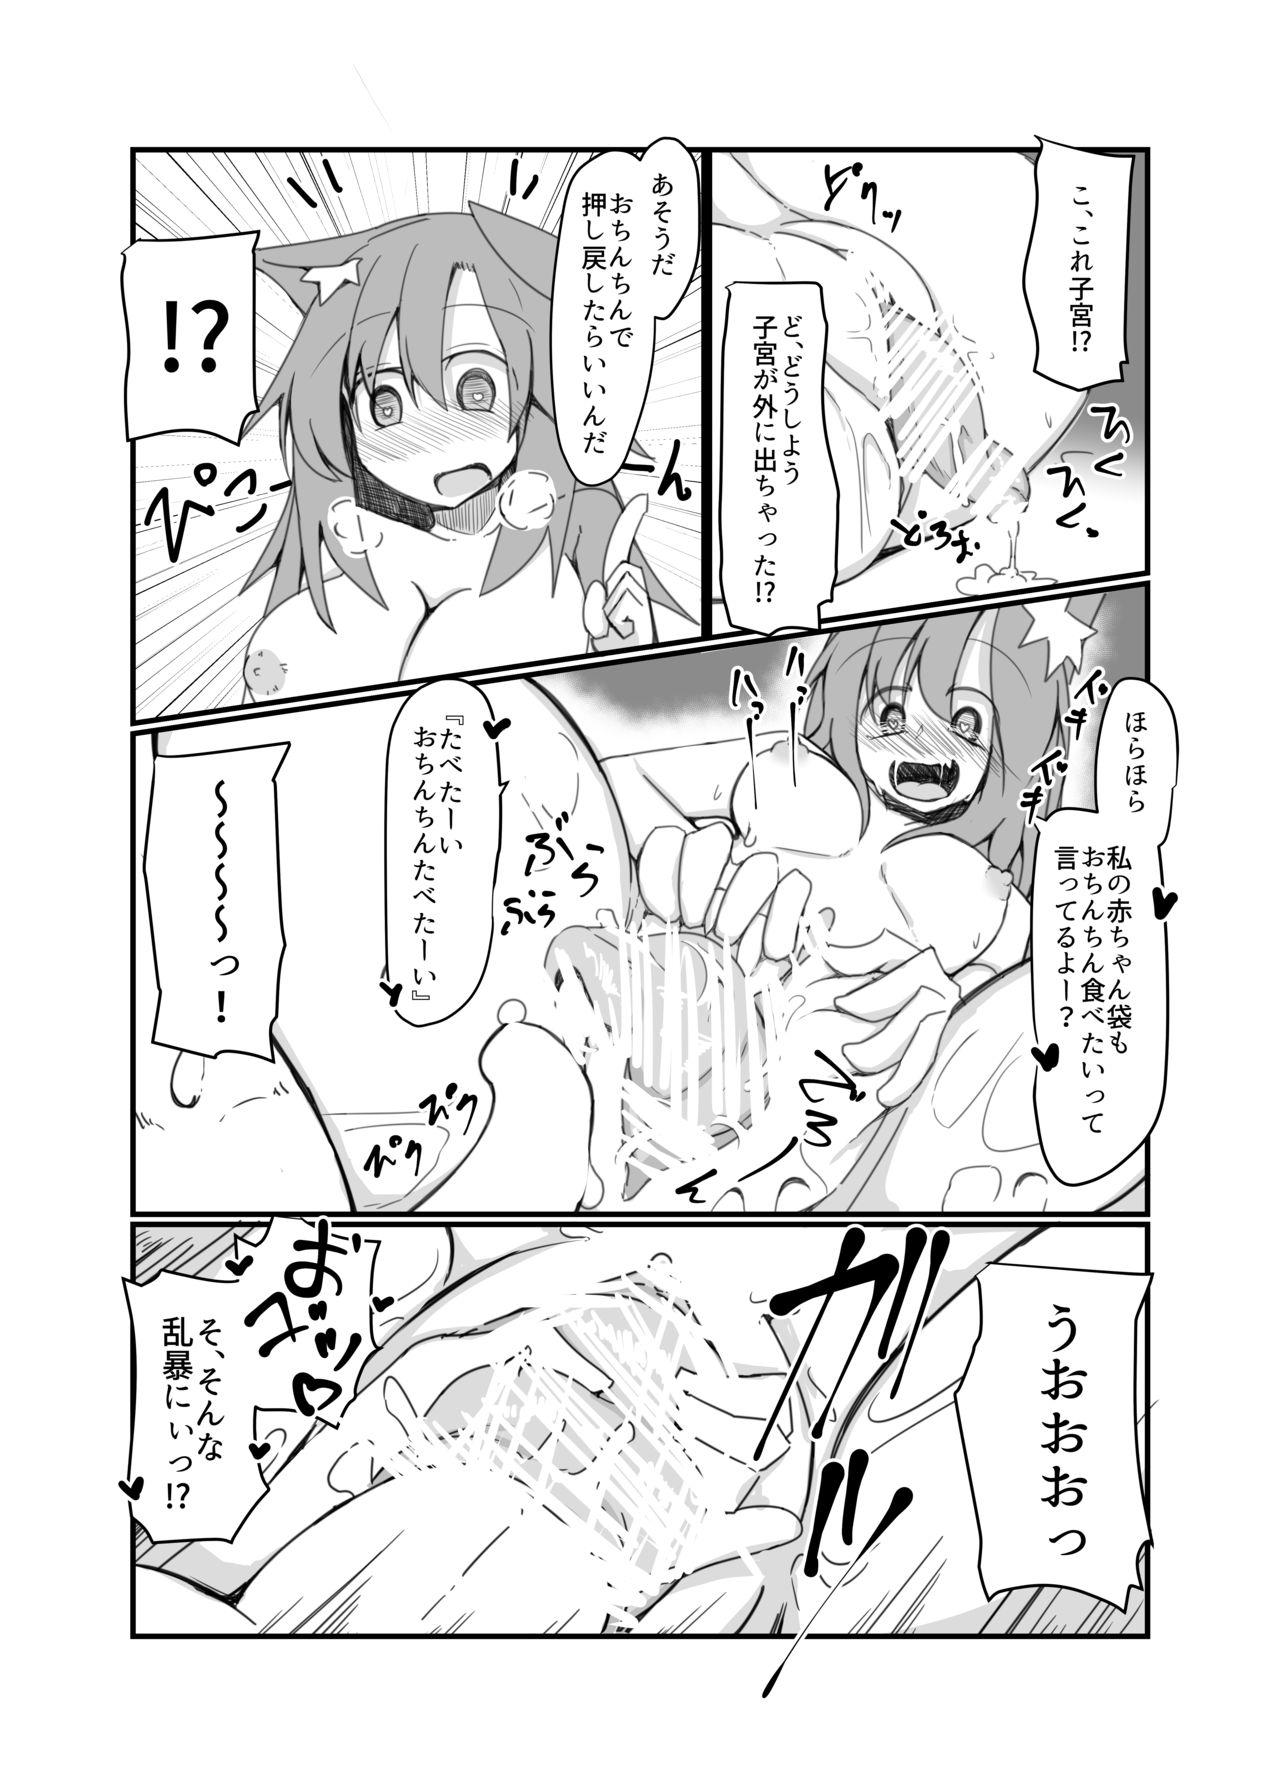 Bisexual 発情期影狼ちゃんと子宮脱ックス - Touhou project Bus - Page 3